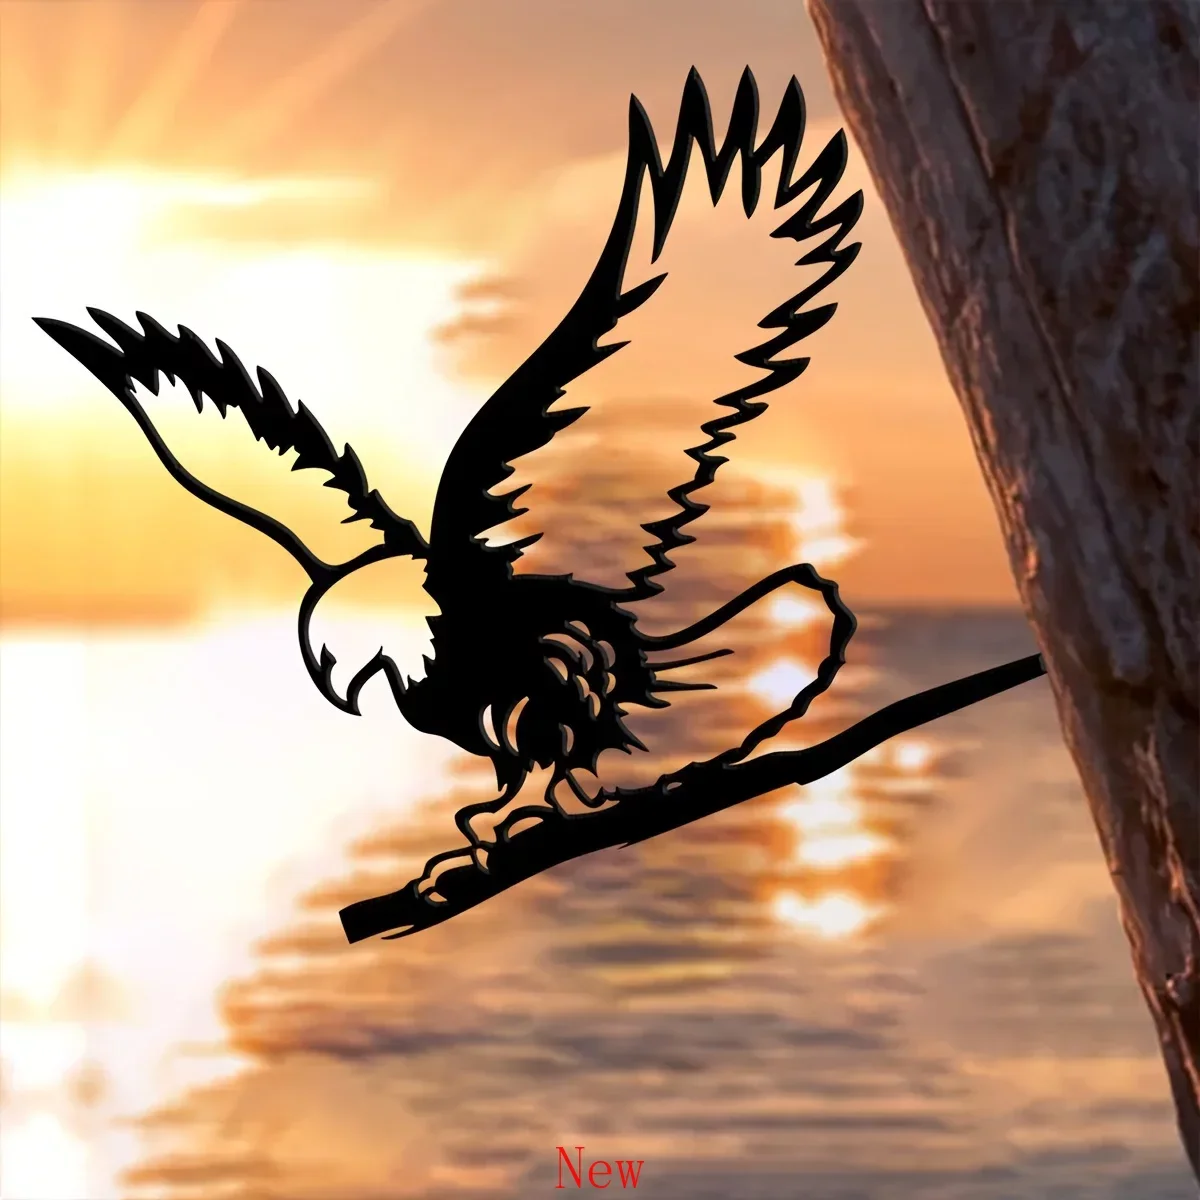 

Promotion 1pc Metal Eagle Flying Free Silhouette Rustic Outdoor Decoration Home Iron Garden Decor Steel Sign Cutout for Patio De